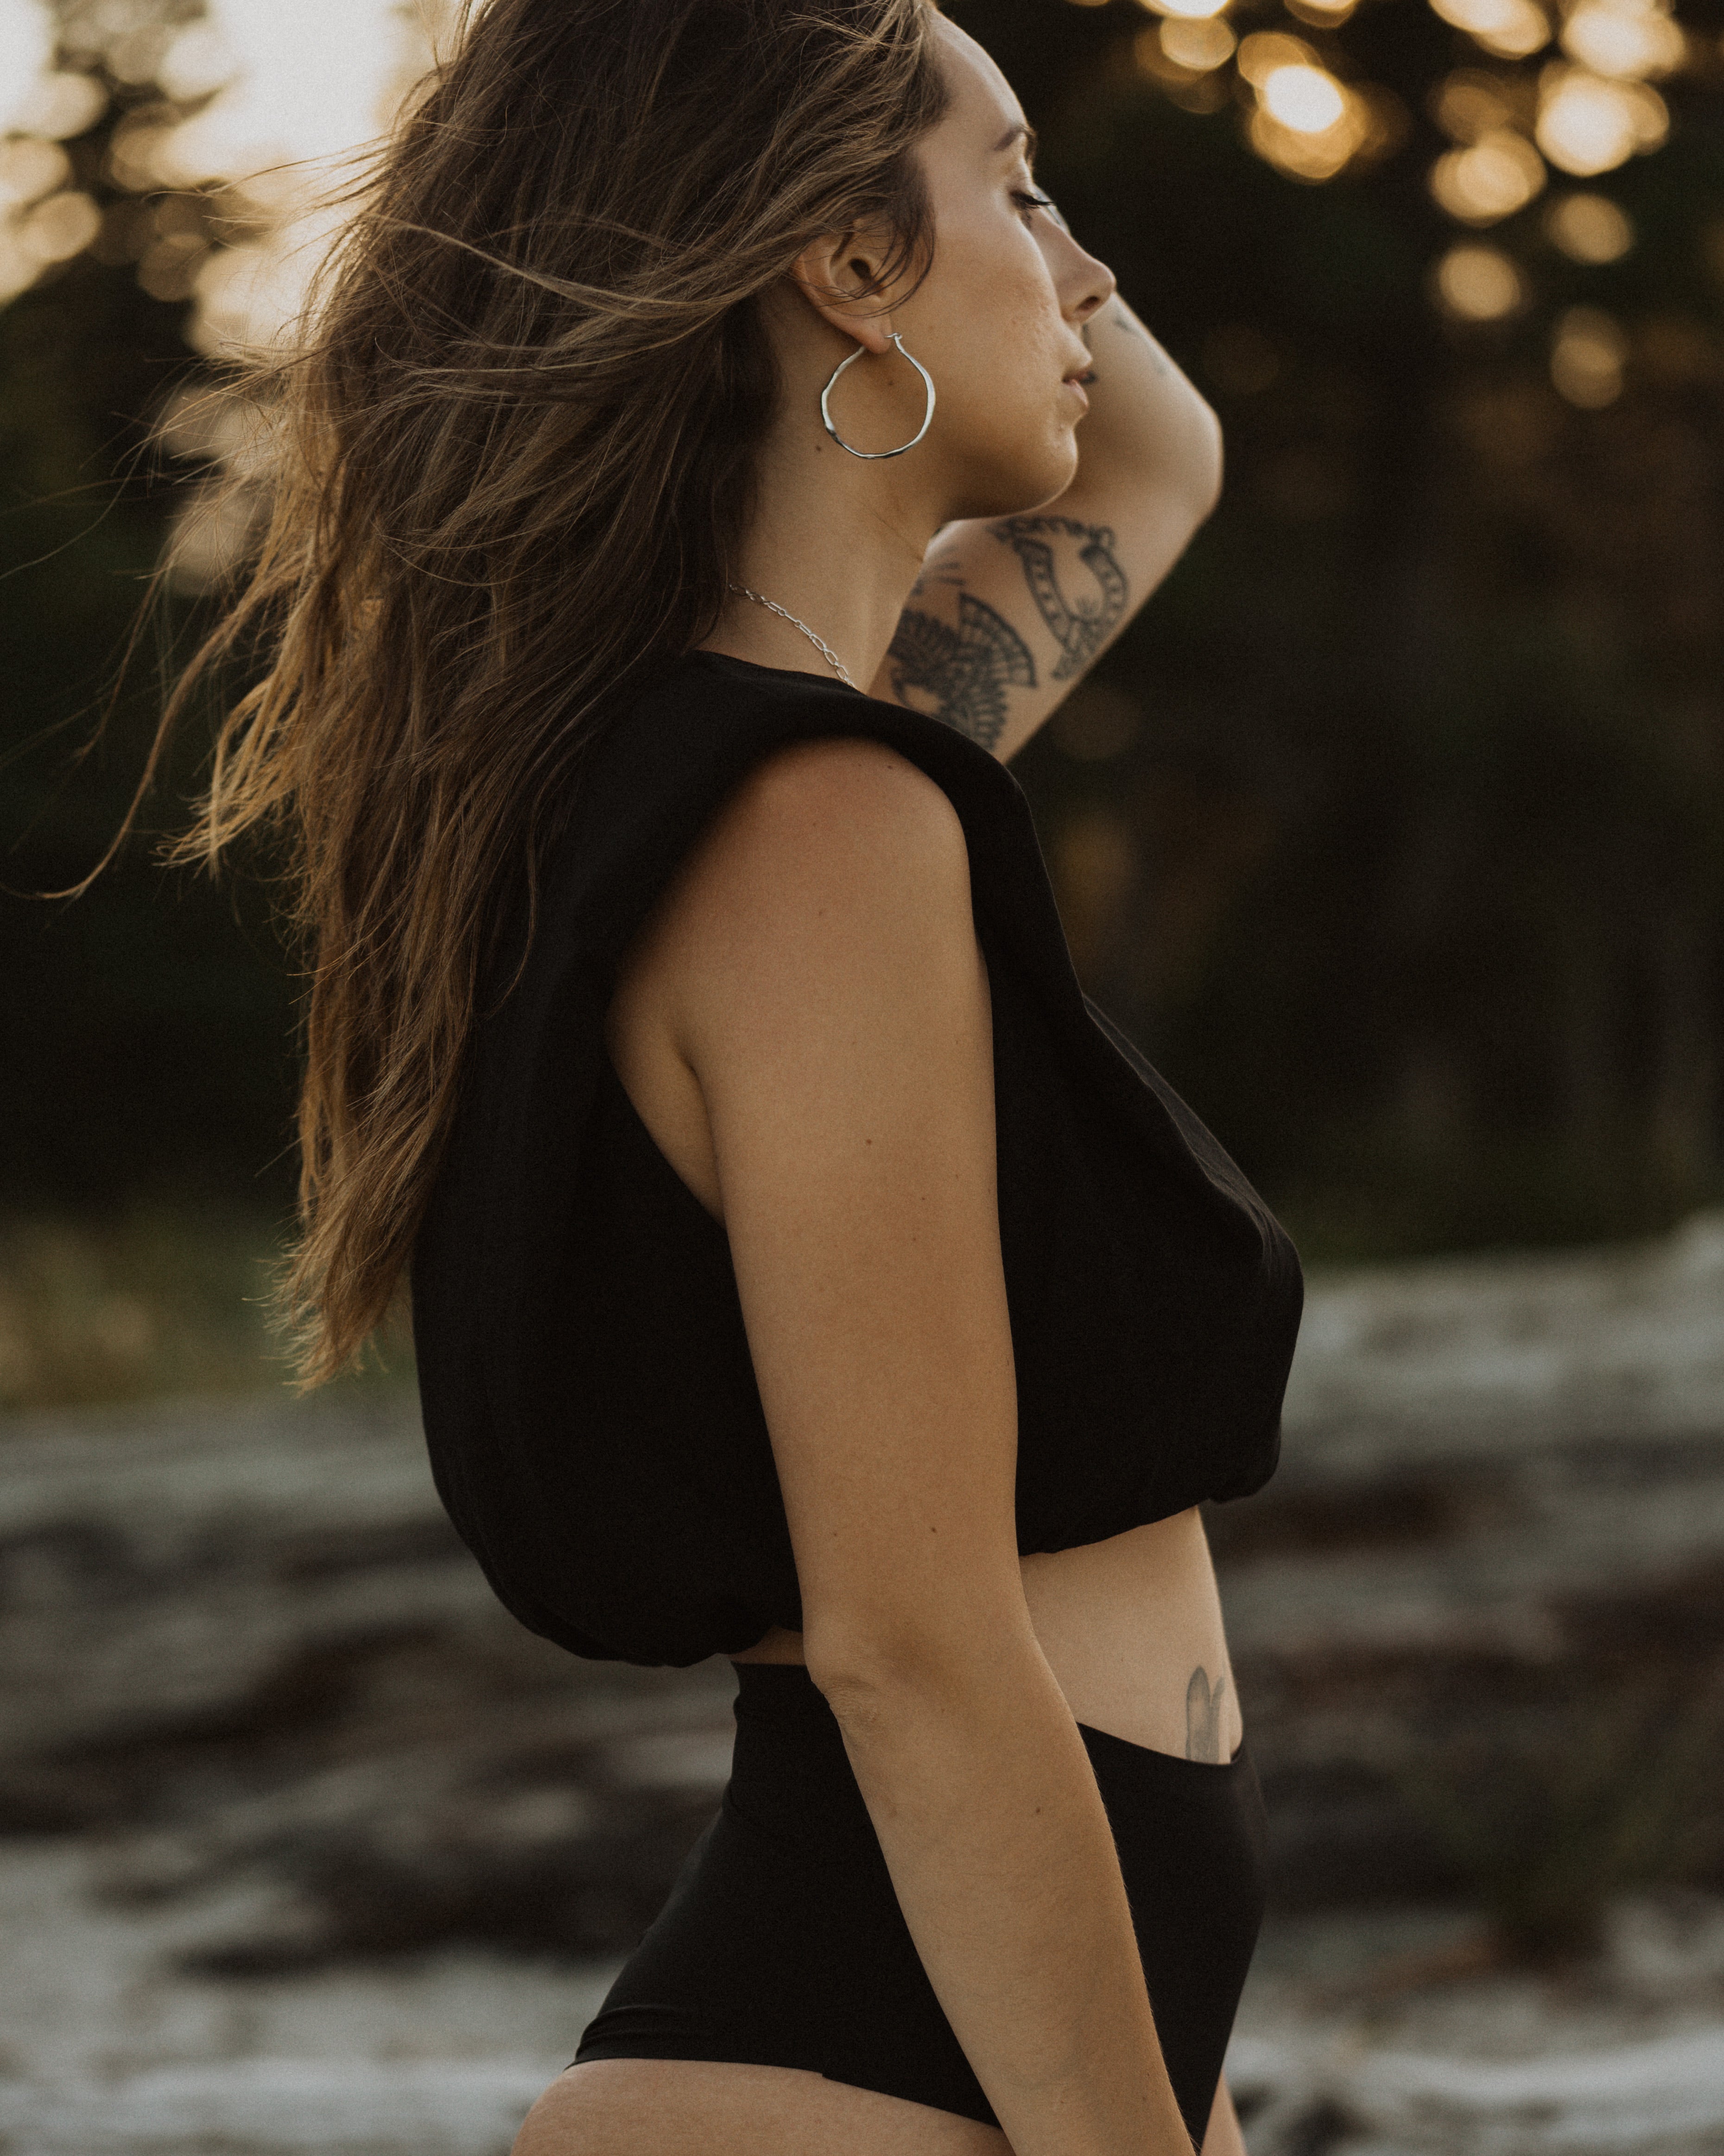 a side profile of a woman at the beach wearing a black top and black bottoms, with silver hoop earrings and a slight peak of a silver necklace